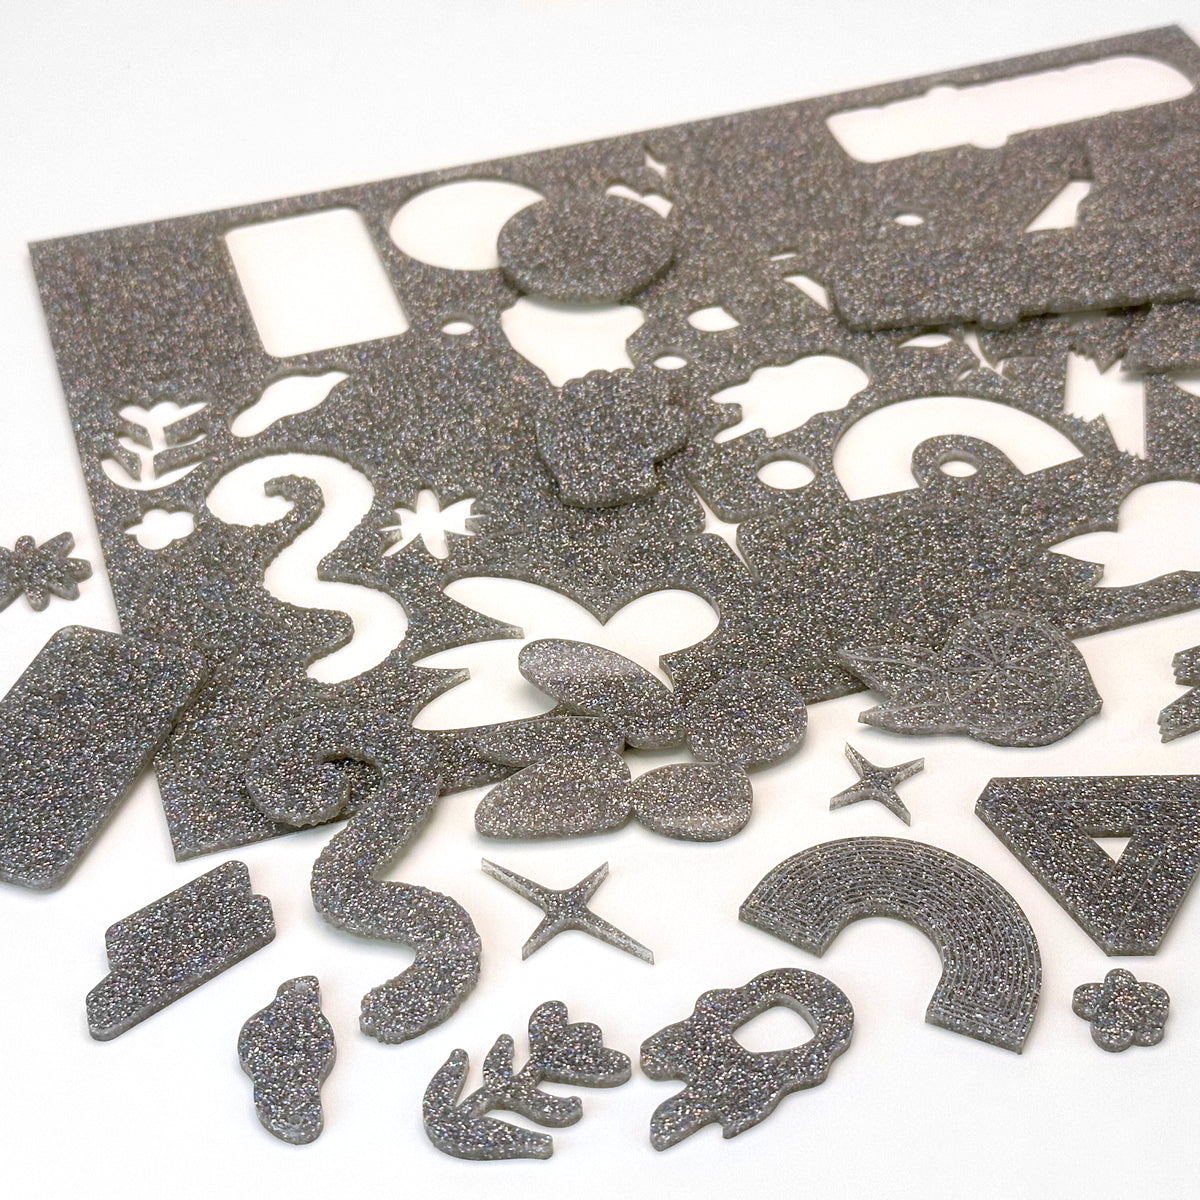 Glitter Holographic Acrylic with laser cutting only - 300x200mm